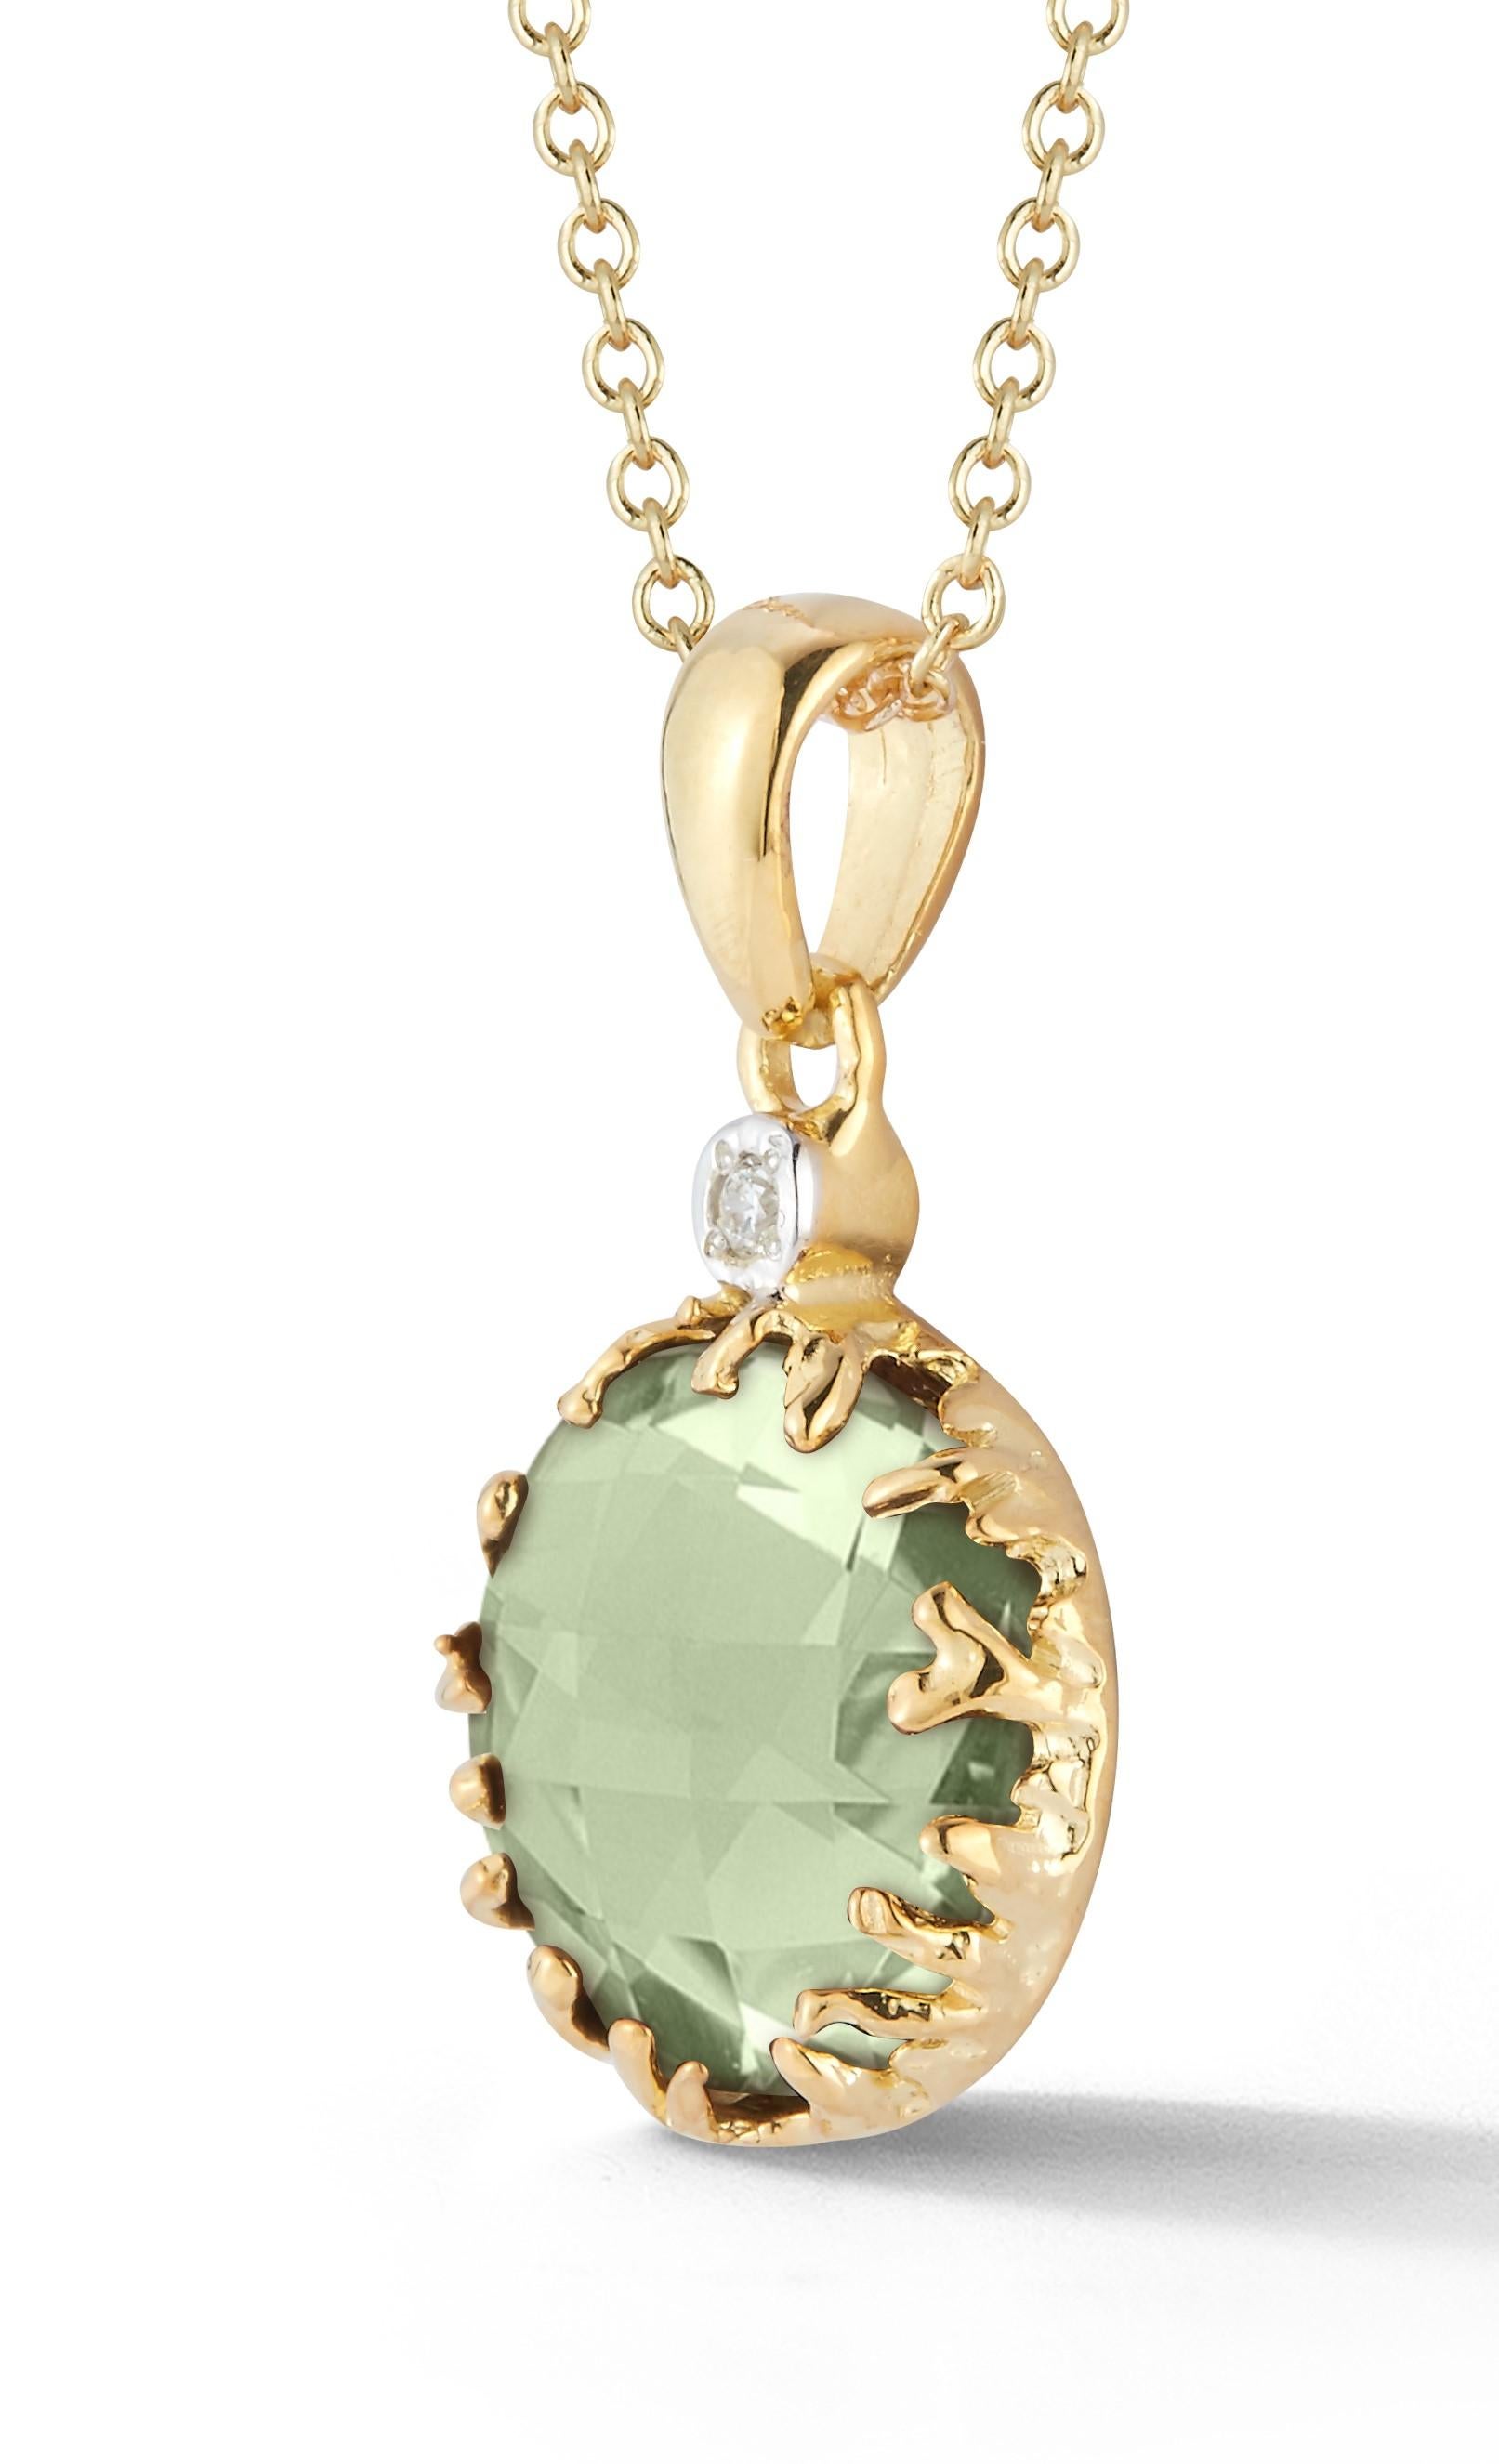 Round Cut Handcrafted 14k Yellow Gold 3.25 Carat Green Amethyst Color Stone Pendant For Sale